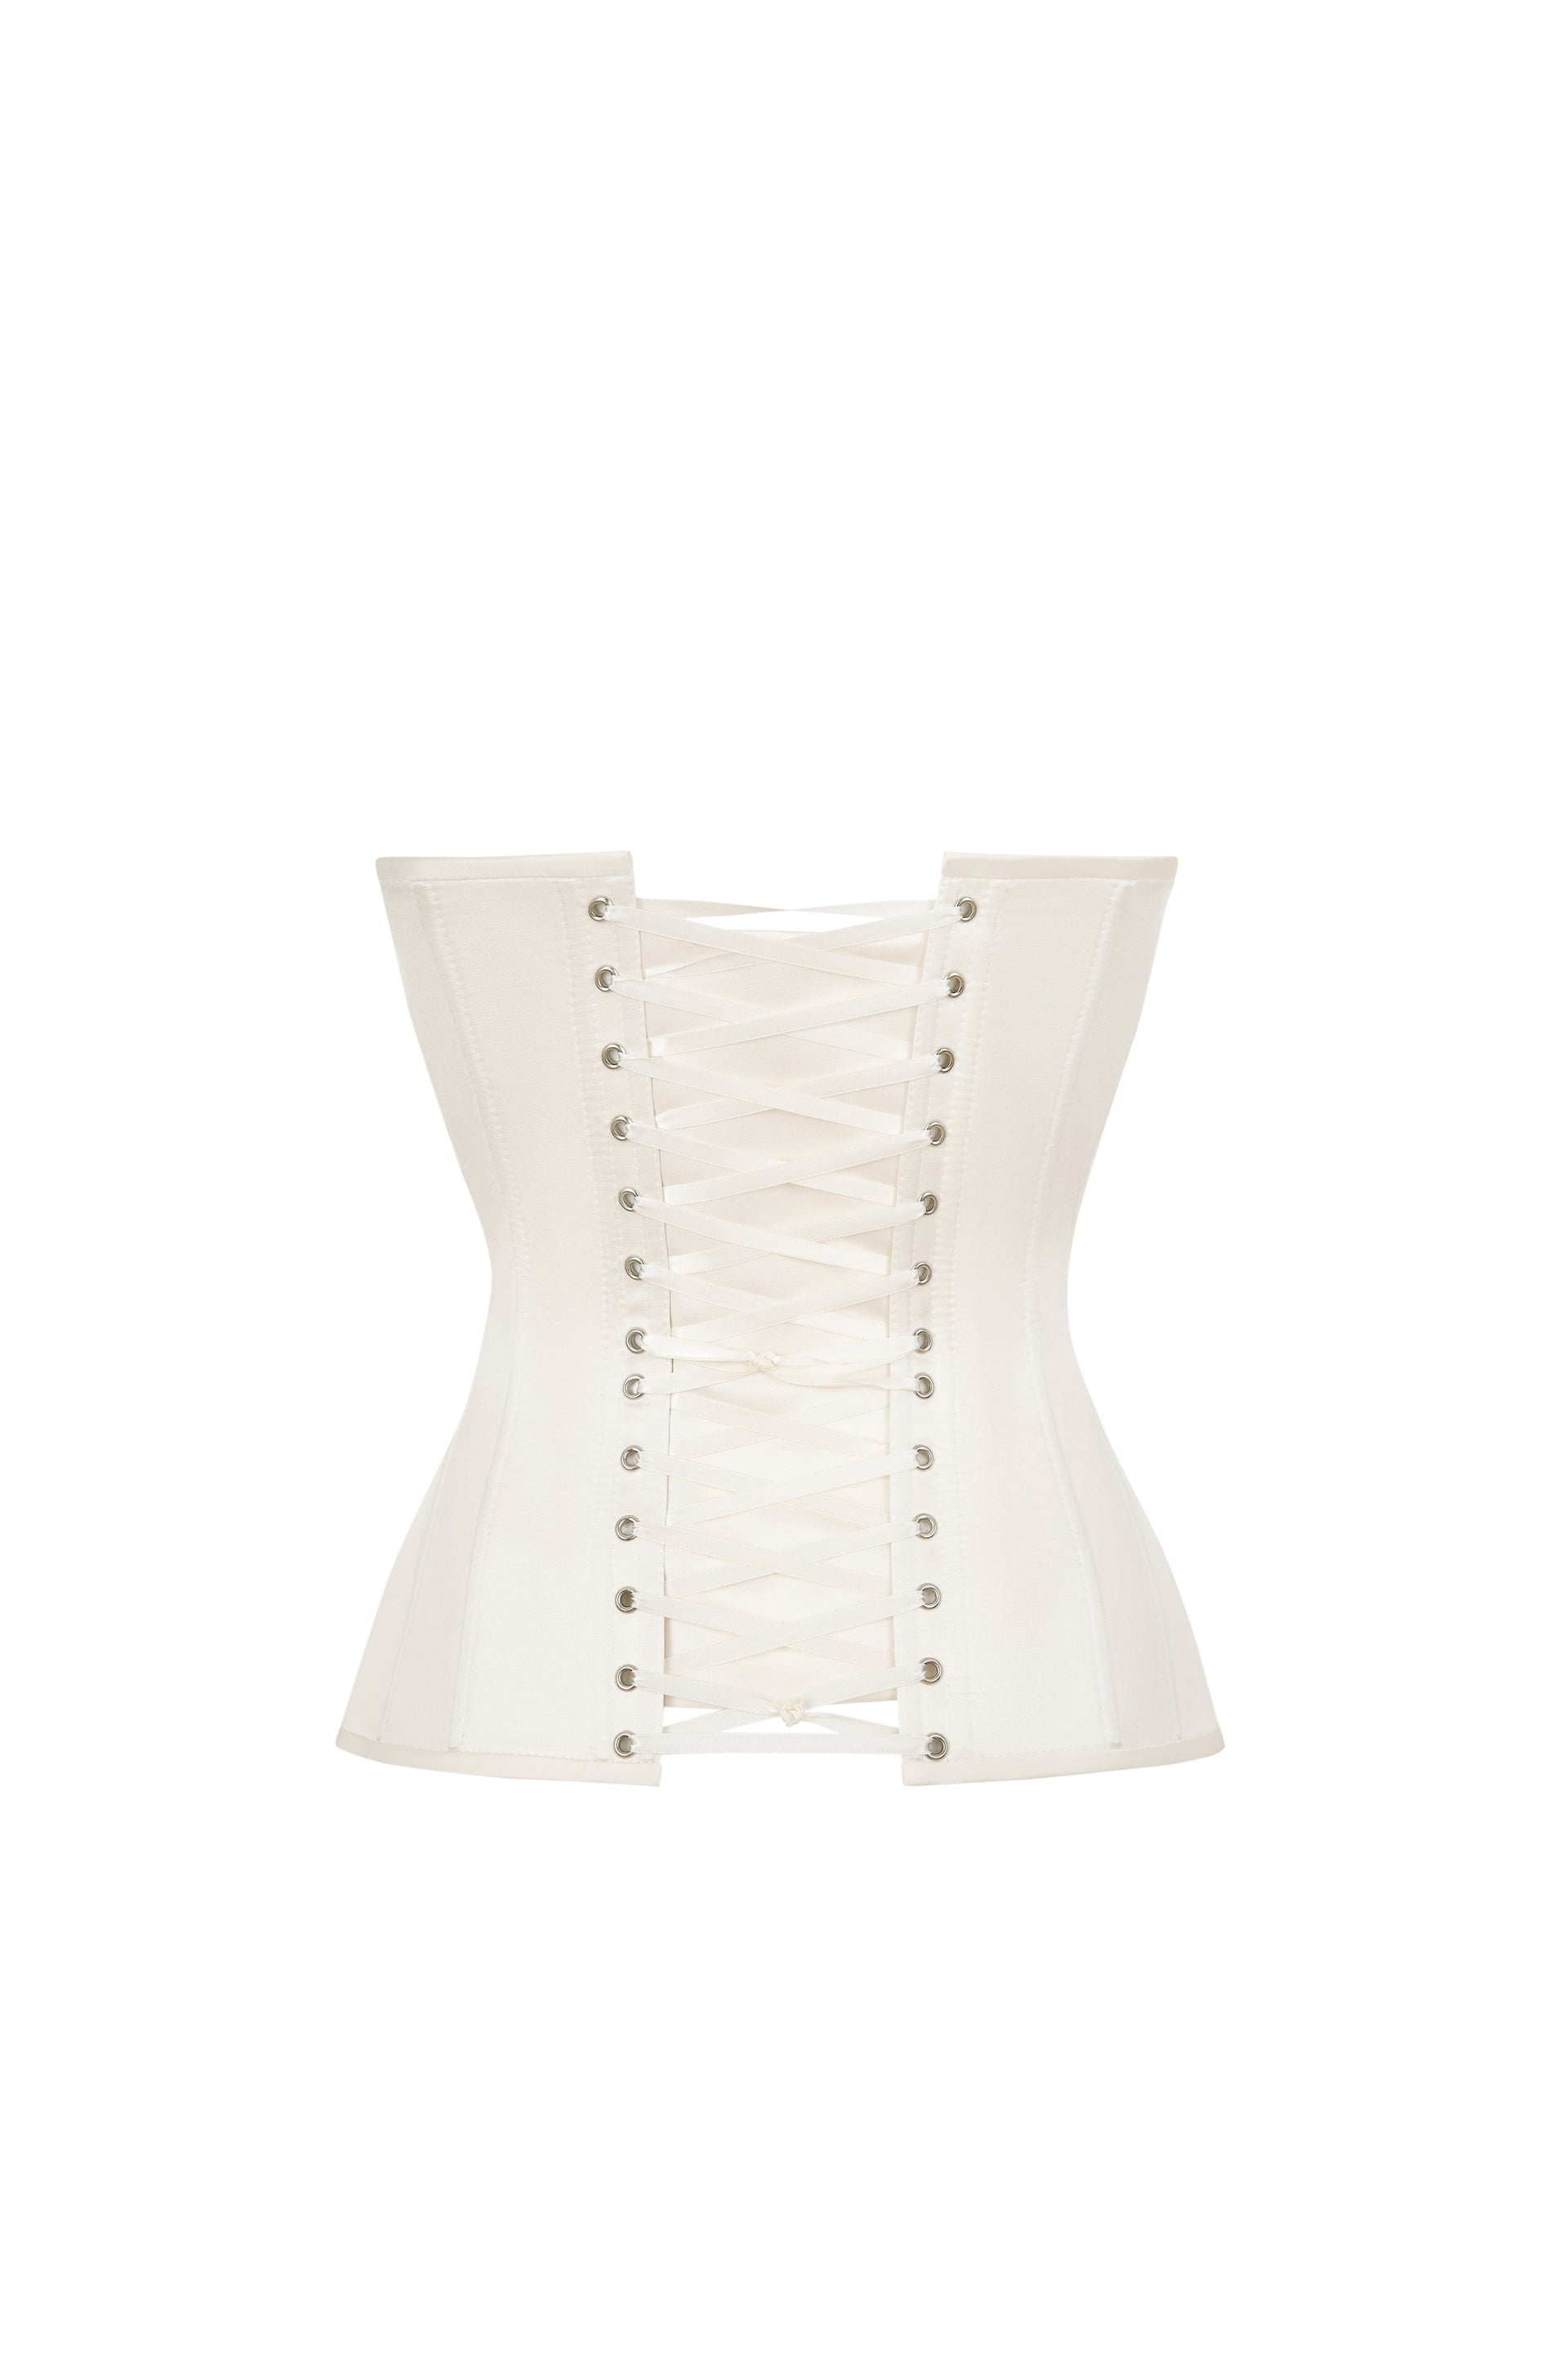 White Net & Satin Corset Top Design by House of Three at Pernia's